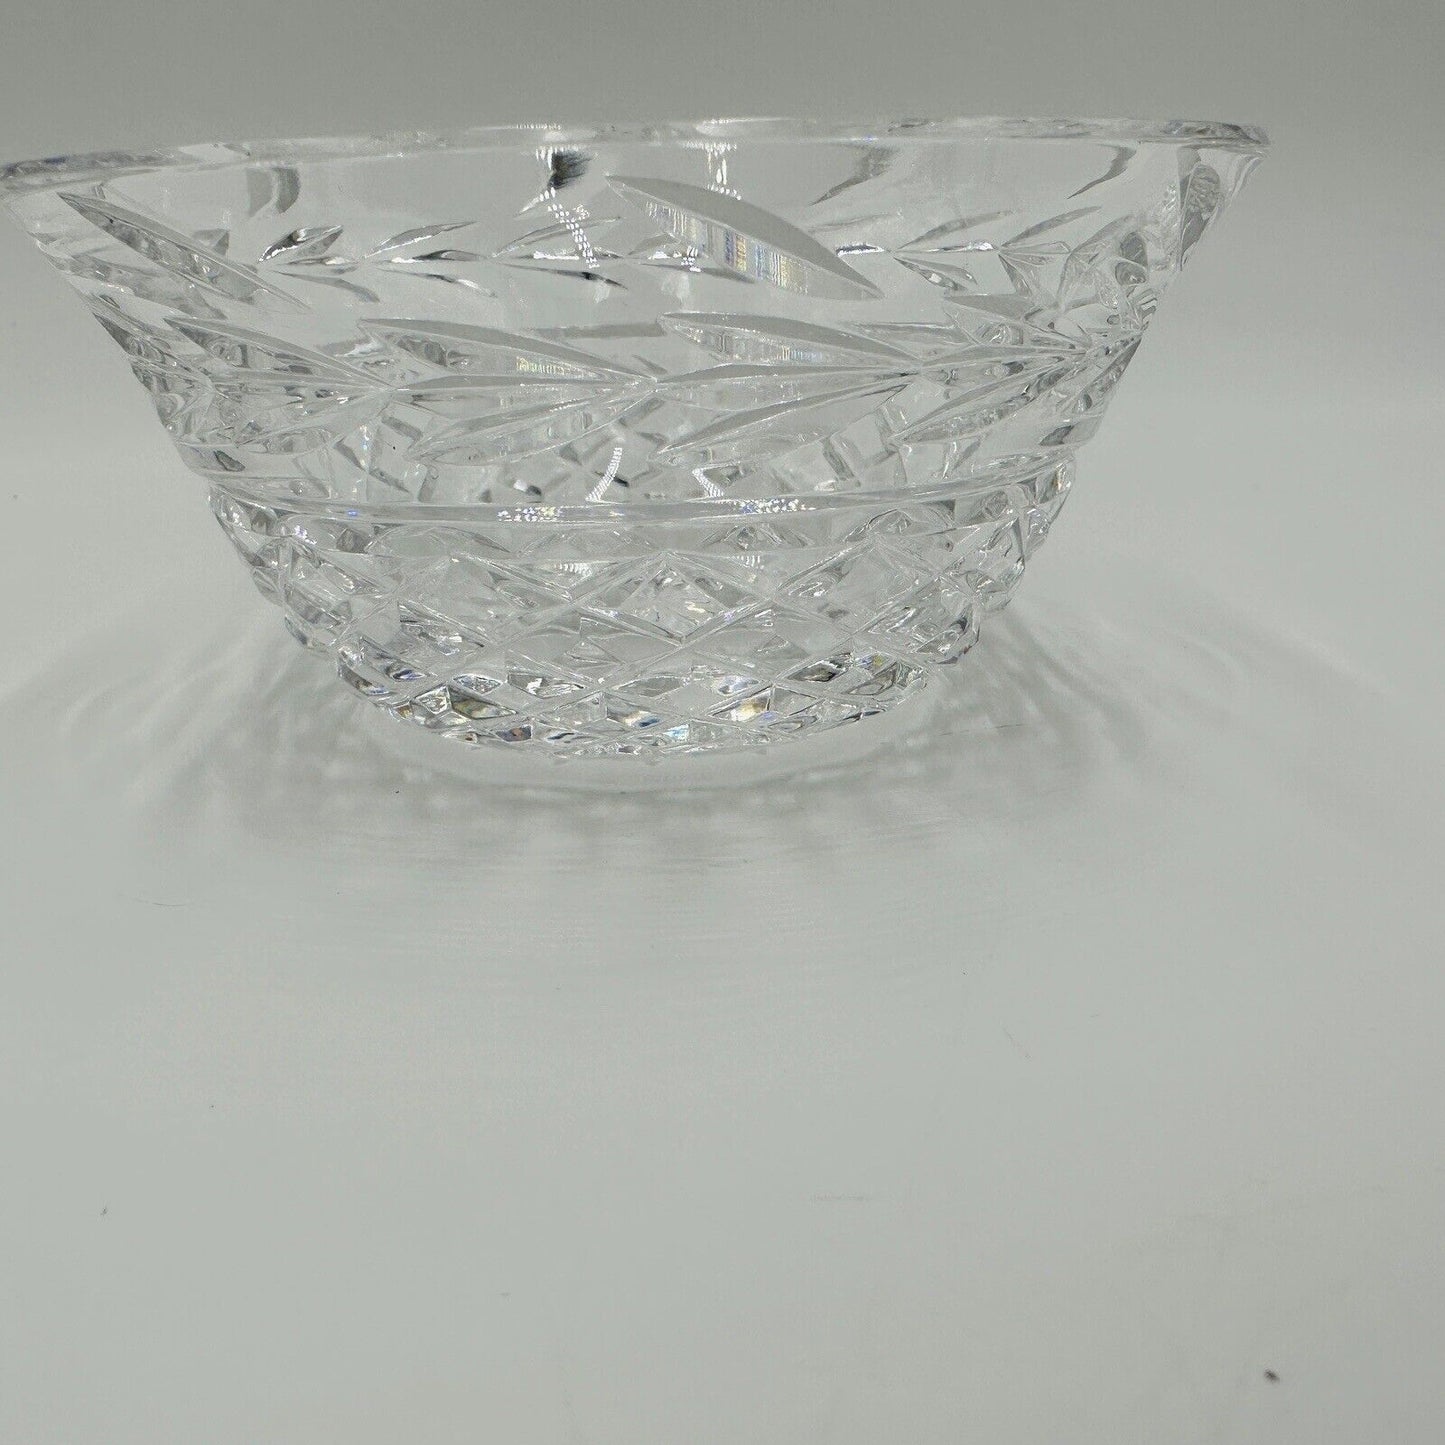 Waterford Crystal Glandore Round Finger Bowl Laurel Leaves Cut Glass 5 in Decor